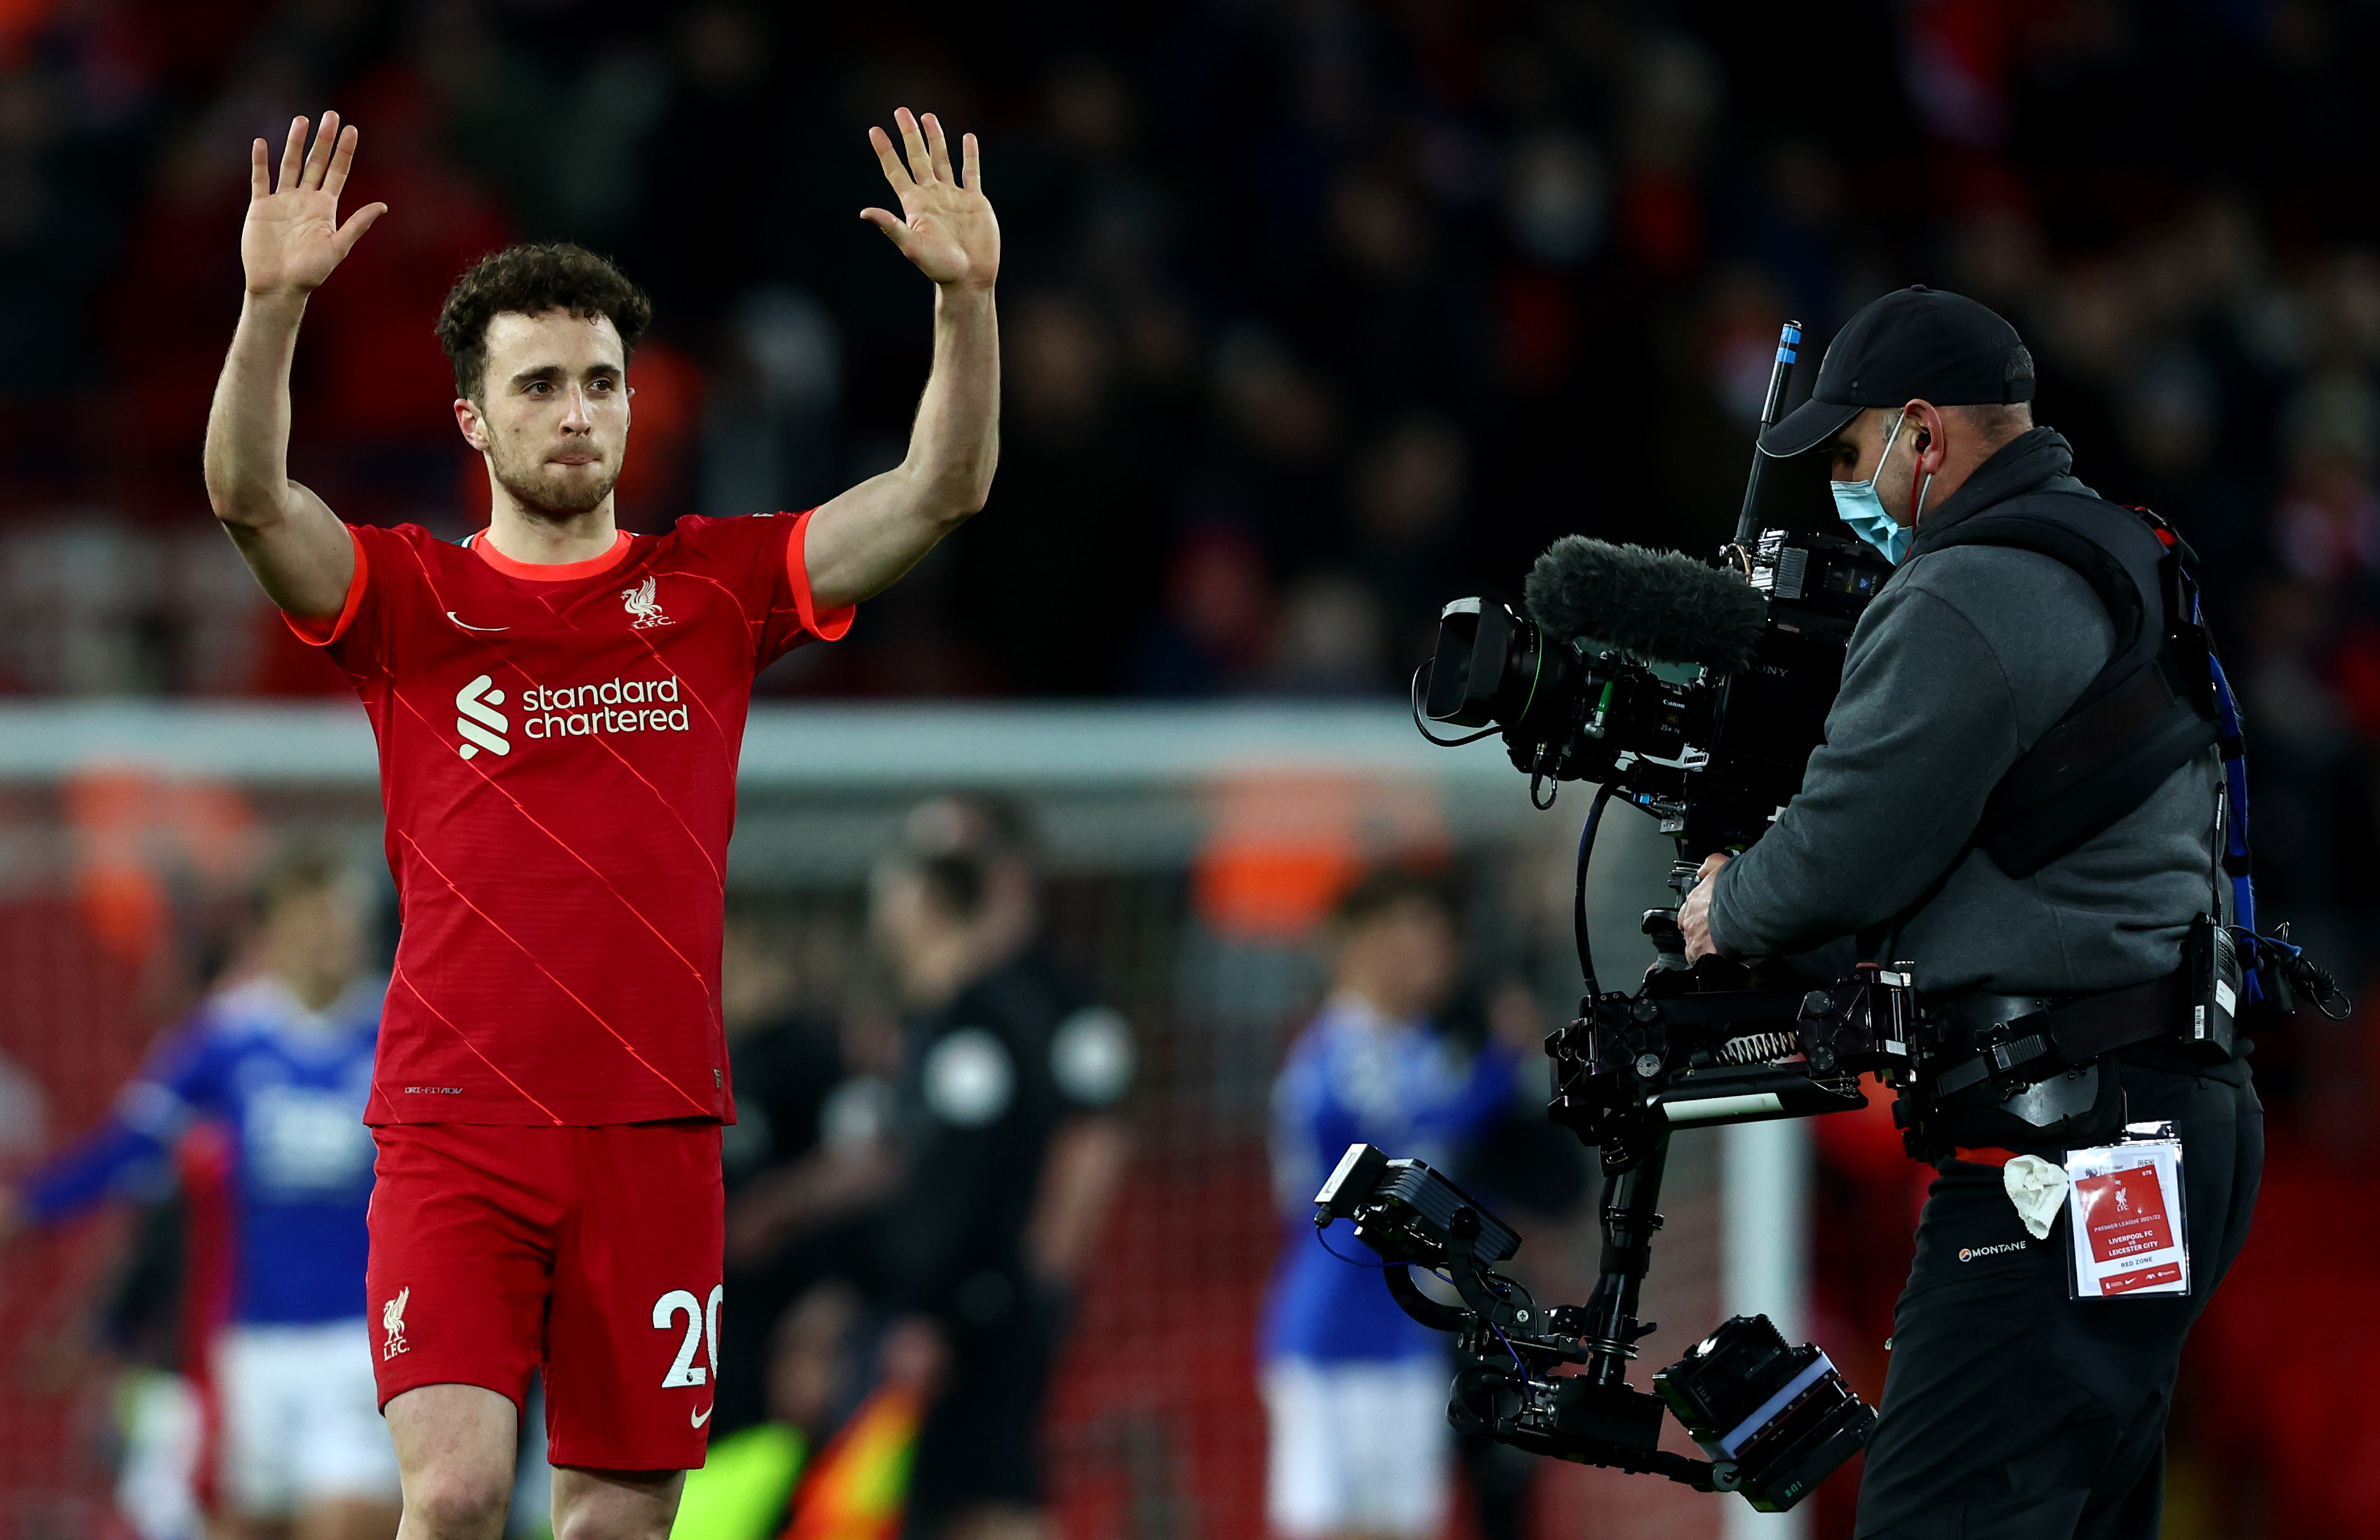 Andy Gray rubbishes claims comparing Diogo Jota to Liverpool legend Kenny Dalglish